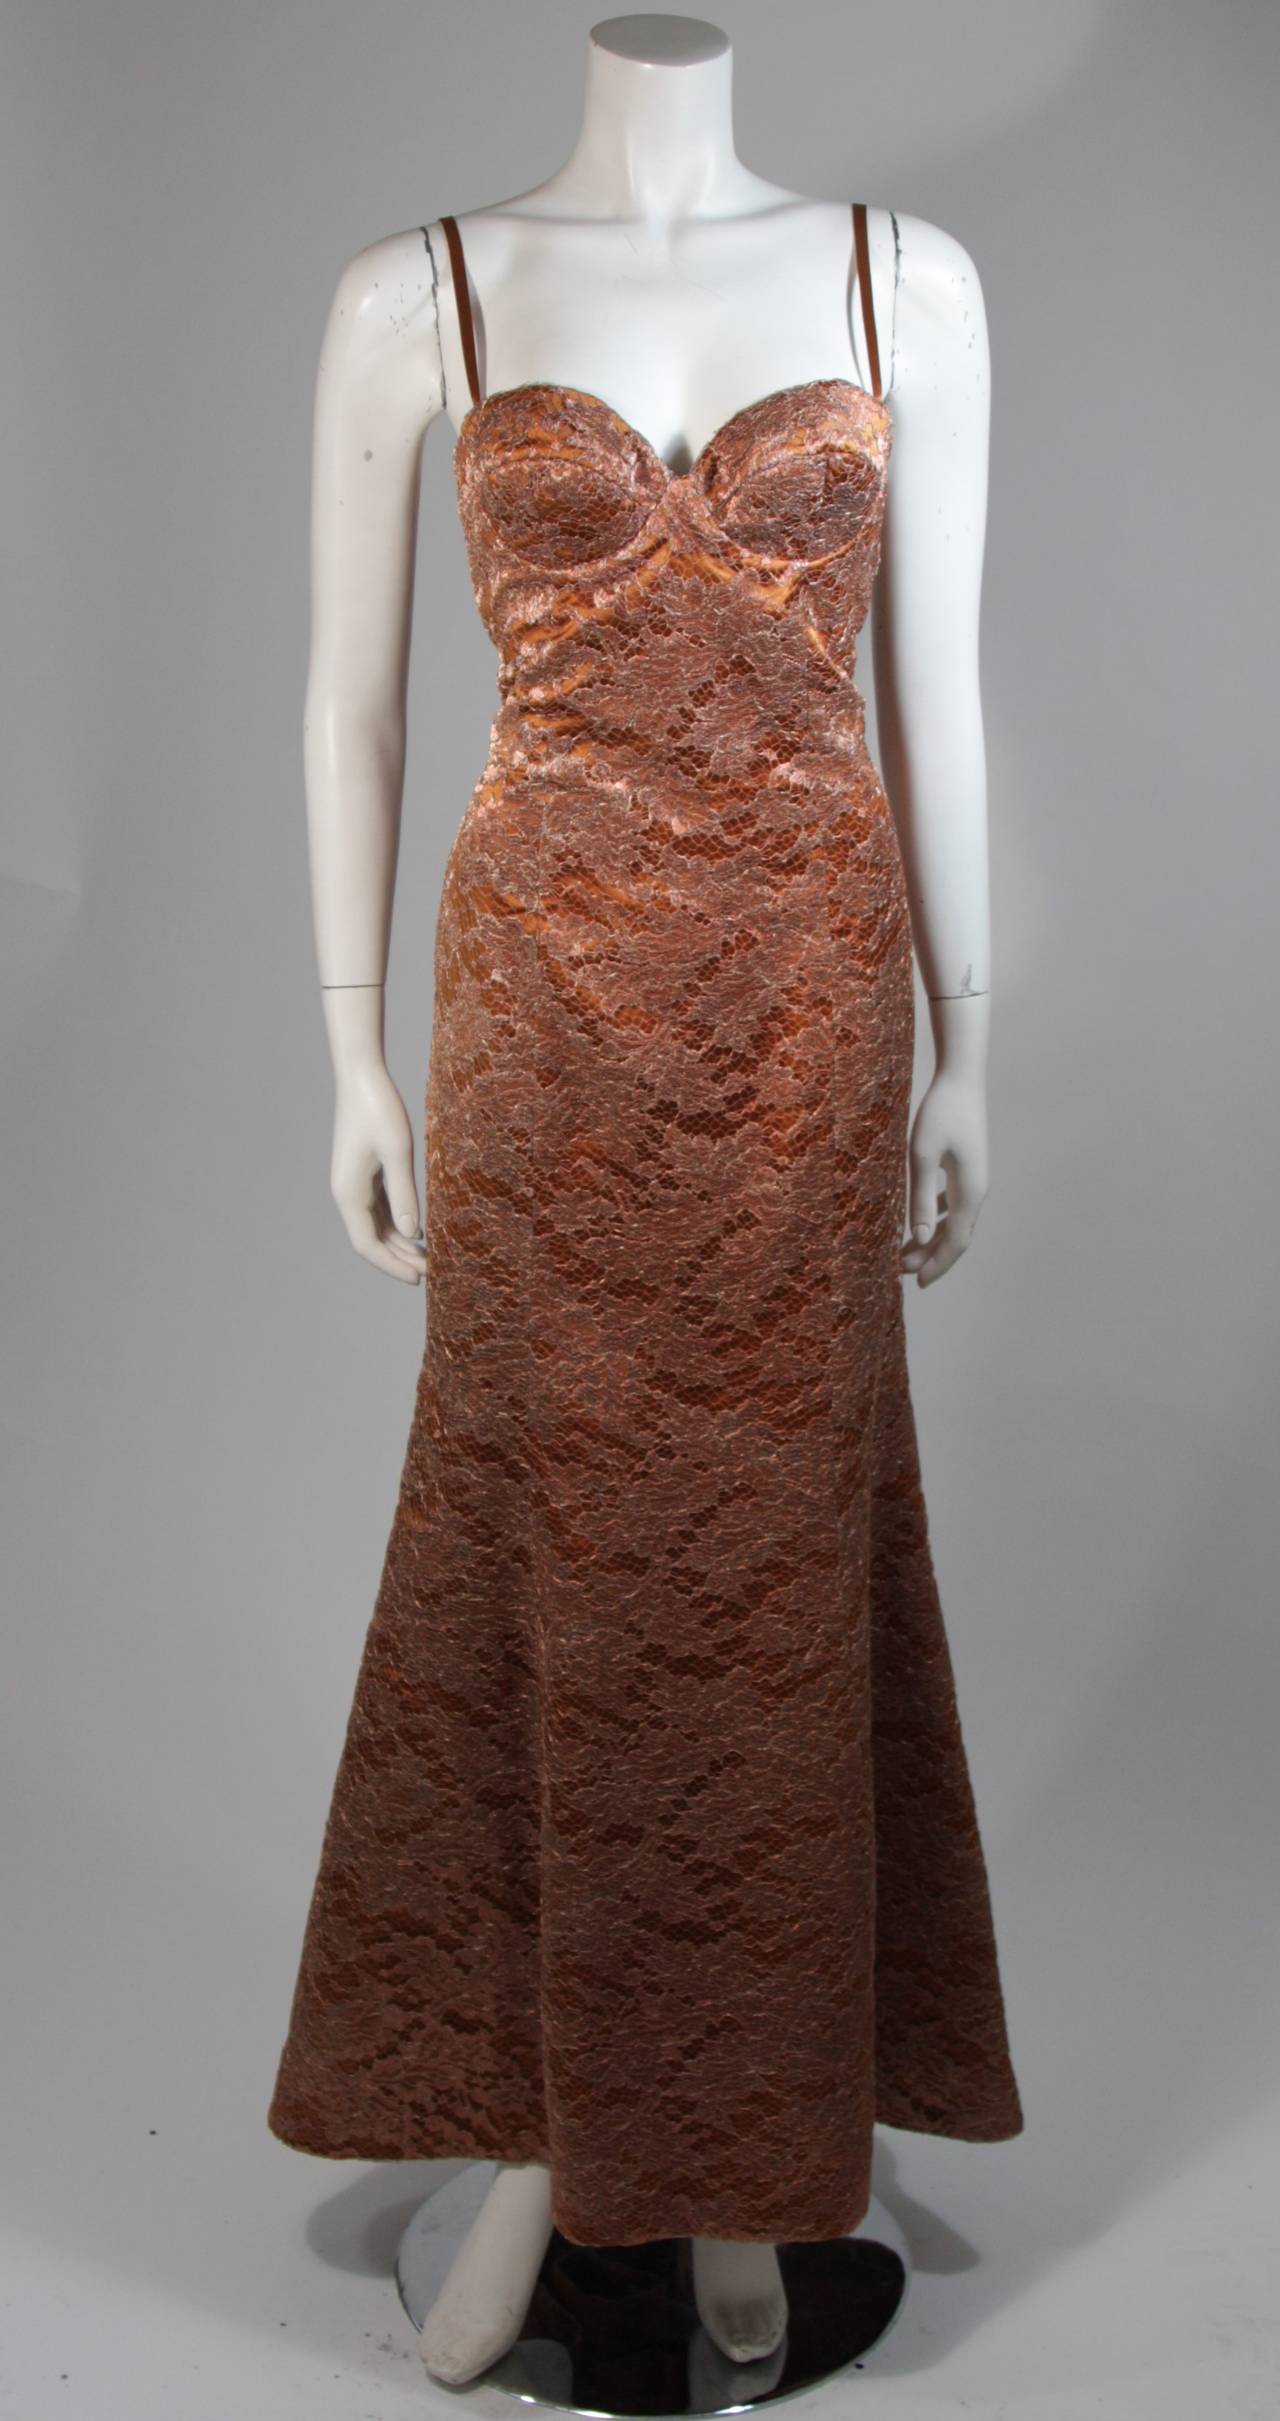 This Escada Couture design is available for viewing at our Beverly Hills Boutique. We offer a large selection of evening gowns and luxury garments.

This gown is composed of a bronze and gold metallic lace a top a bronze satin. The gown features